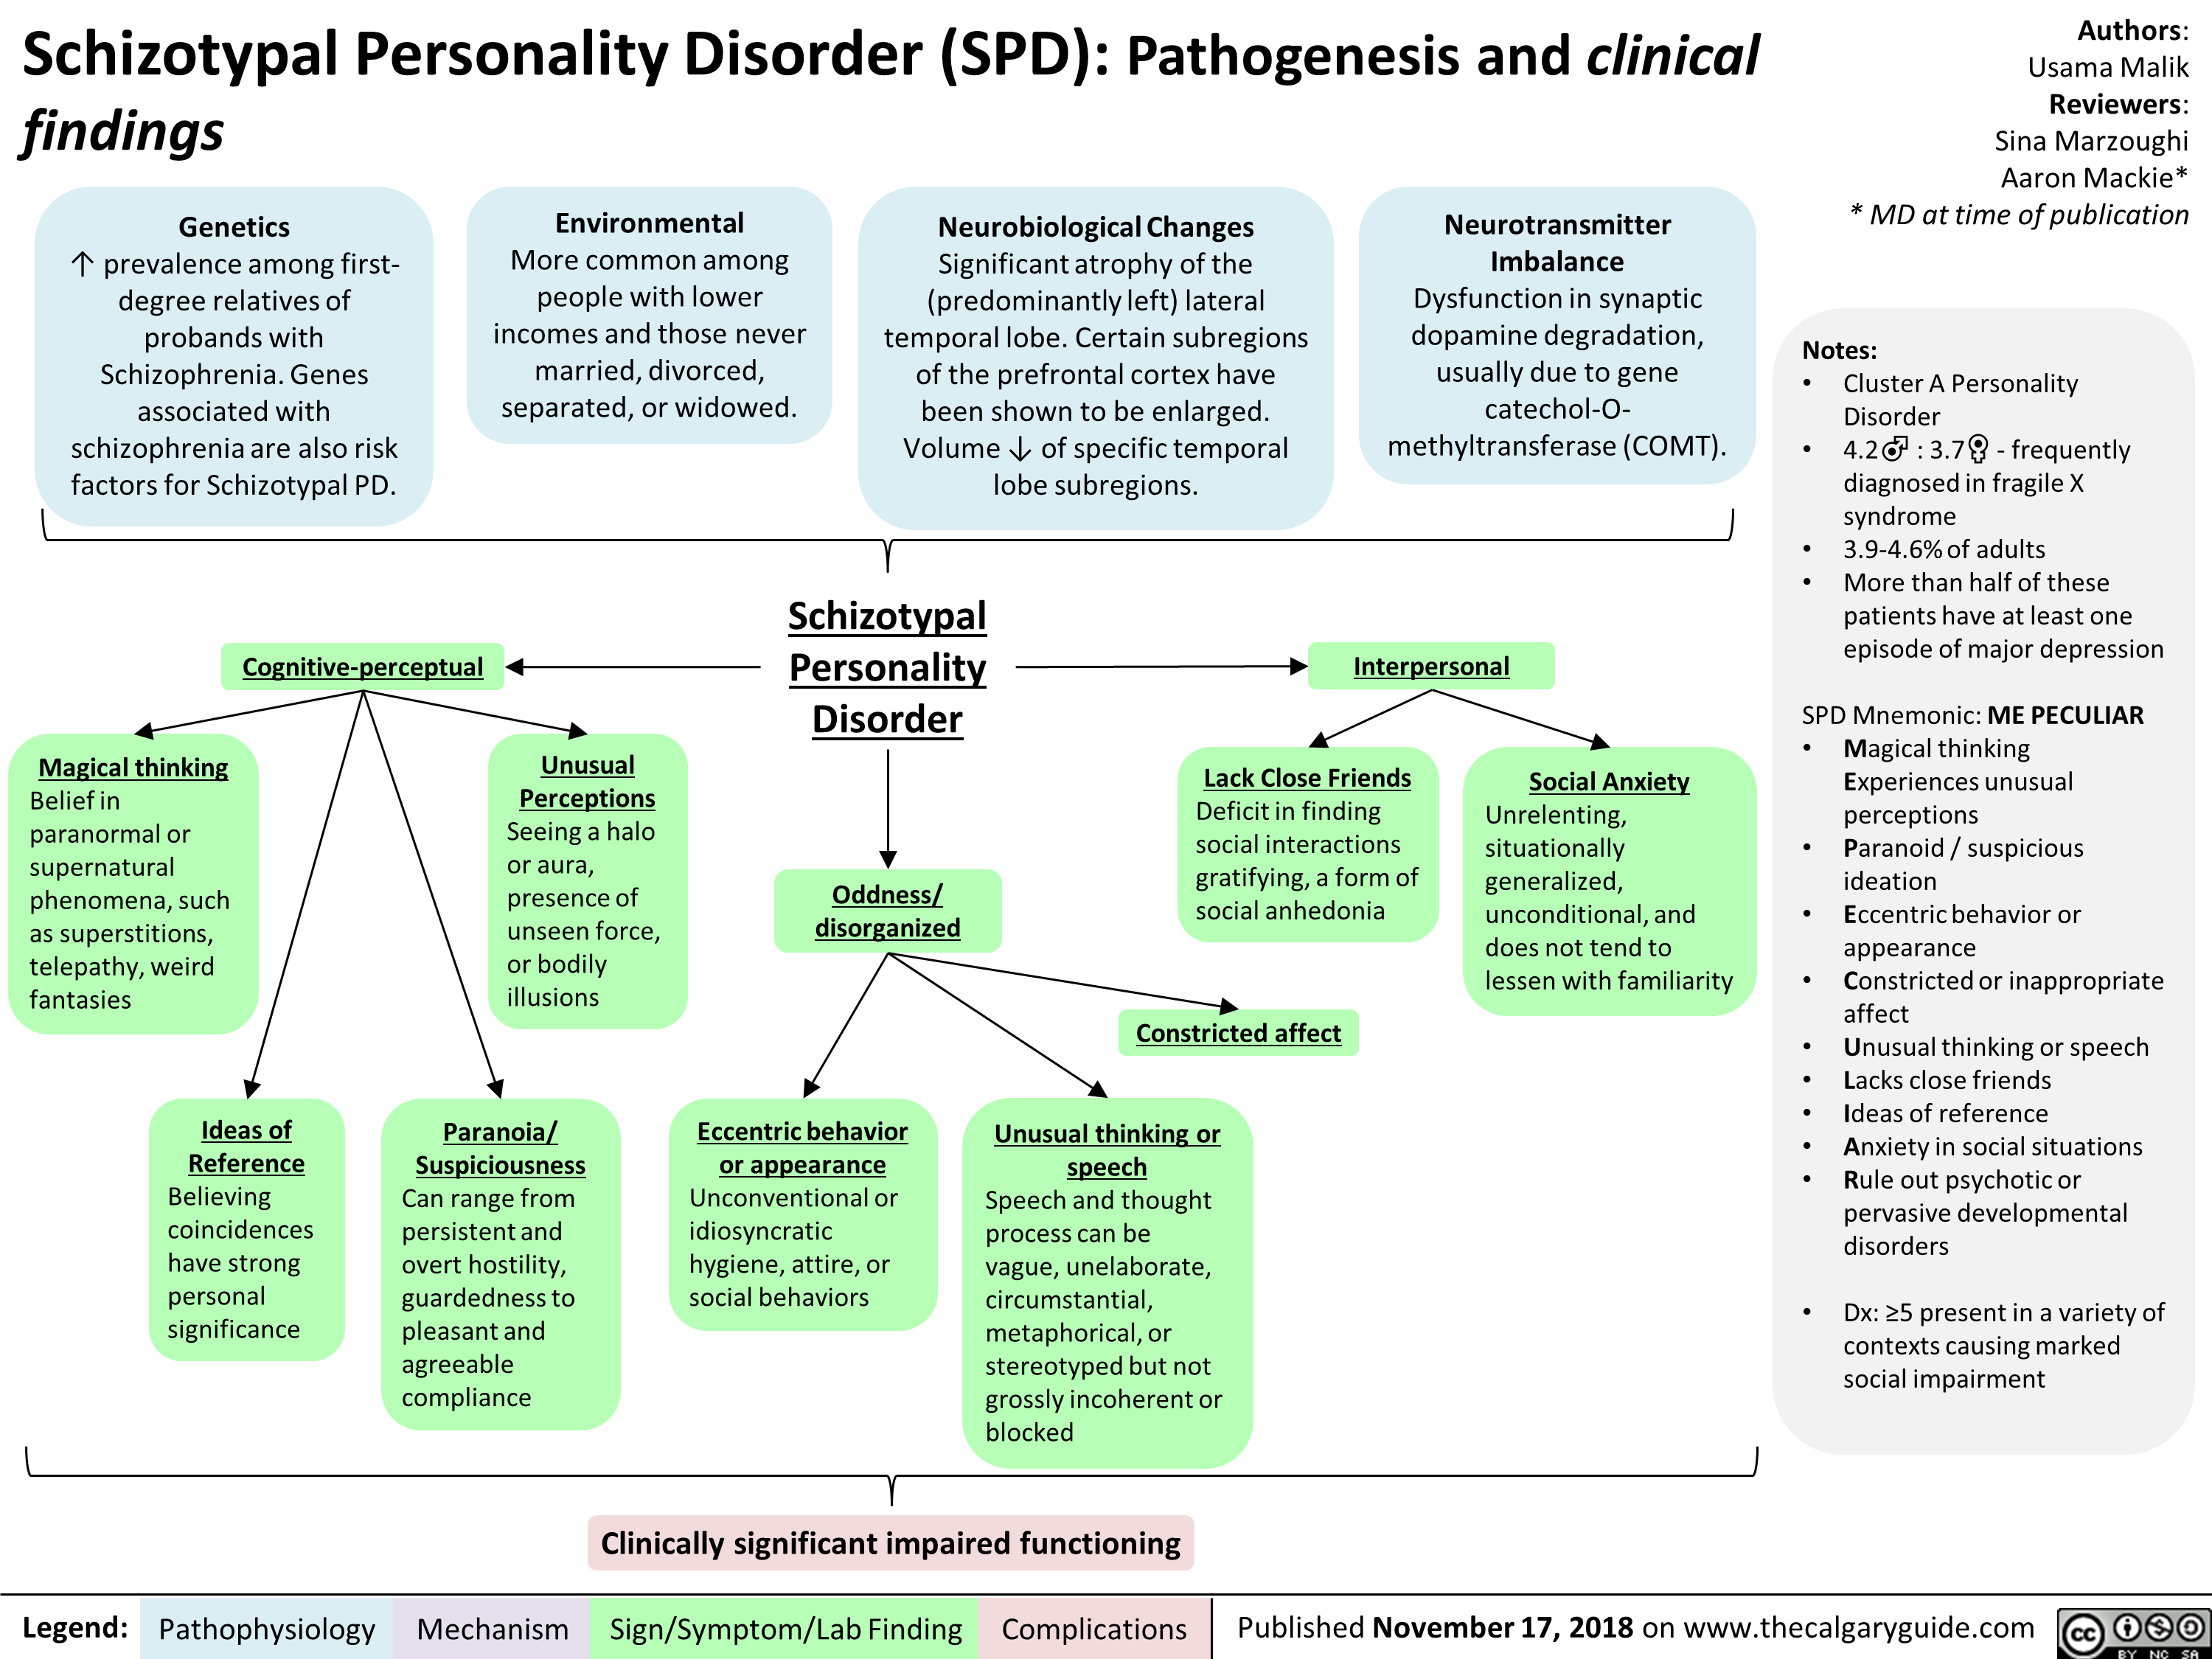 Schizotypal Personality Disorder (SPD): Pathogenesis and clinical findings 
Genetics Environmental Neurobiological Changes Neurotransmitter /1` prevalence among first-More common among Significant atrophy of the Imbalance degree relatives of people with lower (predominantly left) lateral Dysfunction in synaptic probands with incomes and those never temporal lobe. Certain subregions dopamine degradation, Schizophrenia. Genes associated with married, divorced, separated, or widowed. of the prefrontal cortex have been shown to be enlarged. usually due to gene catechol-0- schizophrenia are also risk factors for Schizotypal PD. Volume 1, of specific temporal lobe subregions. methyltransferase (COMT). 
Cognitive-perceptual •  
Magical thinking Belief in paranormal or supernatural phenomena, such as superstitions, telepathy, weird fantasies 
Unusual  Perceptions  Seeing a halo or aura, presence of unseen force, or bodily illusions 
Ideas of Paranoia/  Reference Suspiciousness Believing Can range from coincidences persistent and have strong overt hostility, personal guardedness to significance pleasant and agreeable compliance 
Schizotypal  Personality Disorder  Oddness/ disorganized  
 ► Interpersonal 
Lack Close Friends  Deficit in finding social interactions gratifying, a form of social anhedonia 

Constricted affect 
Eccentric behavior Unusual thinking or  or appearance speech  Unconventional or Speech and thought idiosyncratic process can be hygiene, attire, or vague, unelaborate, social behaviors circumstantial, metaphorical, or stereotyped but not grossly incoherent or blocked 
Social Anxiety  Unrelenting, situationally generalized, unconditional, and does not tend to lessen with familiarity 
Clinically significant impaired functioning 
Authors: Usama Malik Reviewers: Sina Marzoughi Aaron Mackie* * MD at time of publication 
Notes: • Cluster A Personality Disorder • 4.2CY : 3.7g - frequently diagnosed in fragile X syndrome • 3.9-4.6%of adults • More than half of these patients have at least one episode of major depression 
SPD Mnemonic: ME PECULIAR • Magical thinking Experiences unusual perceptions • Paranoid / suspicious ideation • Eccentric behavior or appearance • Constricted or inappropriate affect • Unusual thinking or speech • Lacks close friends • Ideas of reference • Anxiety in social situations • Rule out psychotic or pervasive developmental disorders 
• Dx: present in a variety of contexts causing marked social impairment 